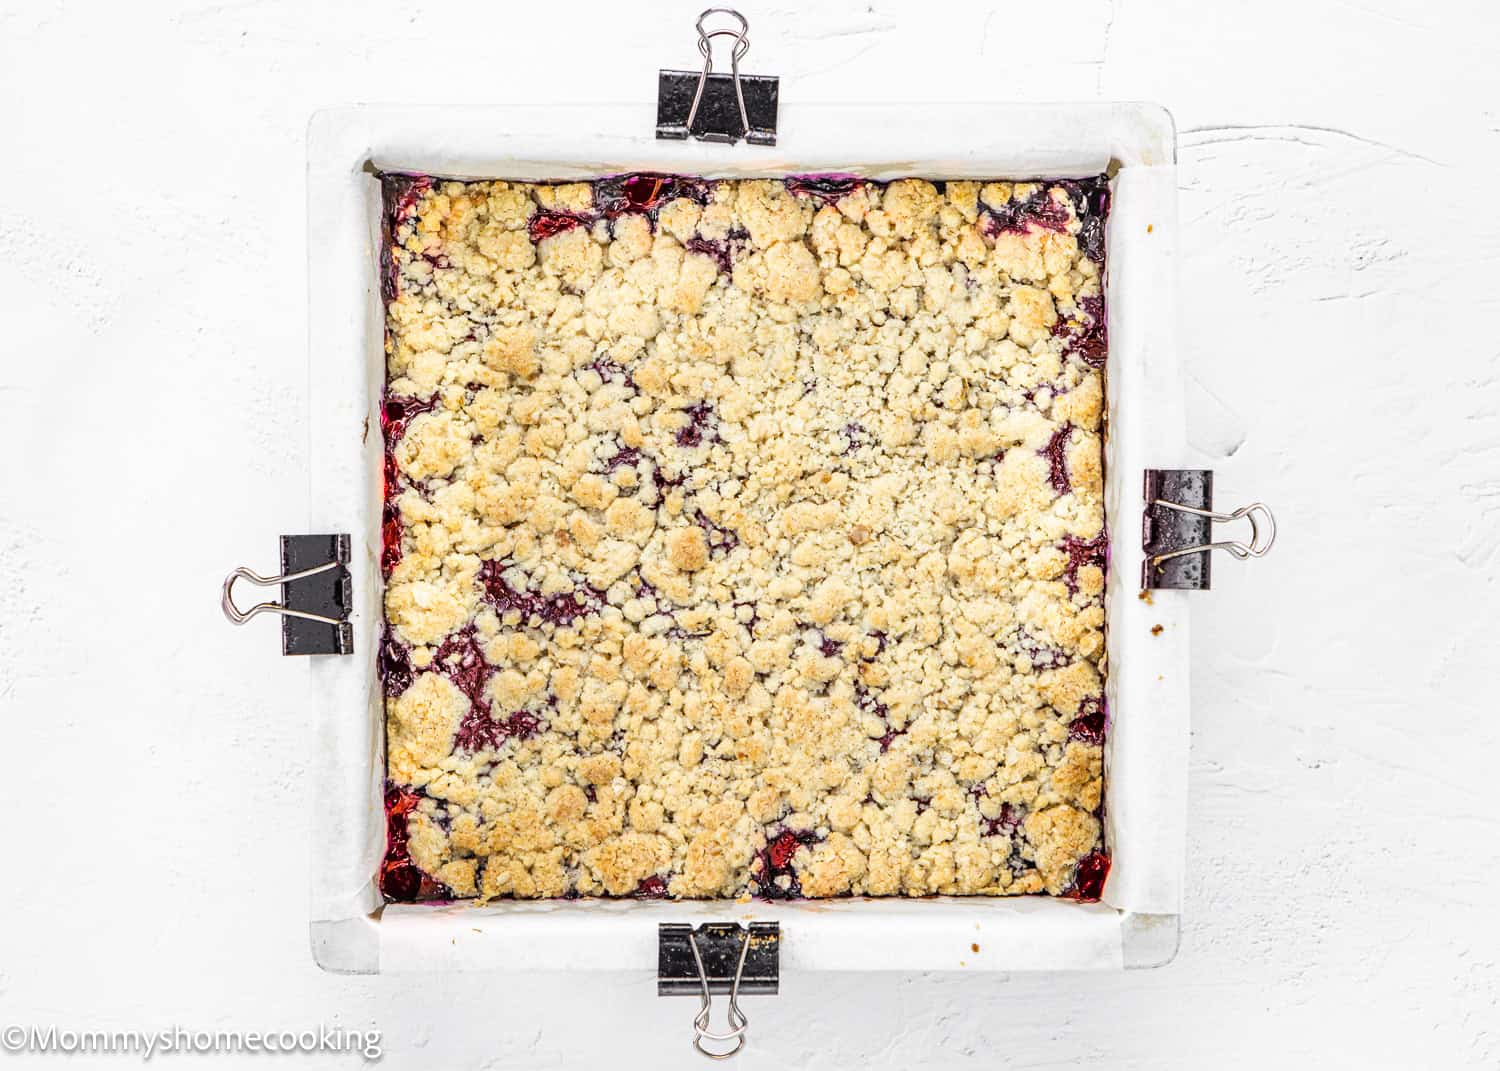 baked Eggless Strawberry Bars in a square baking pan.